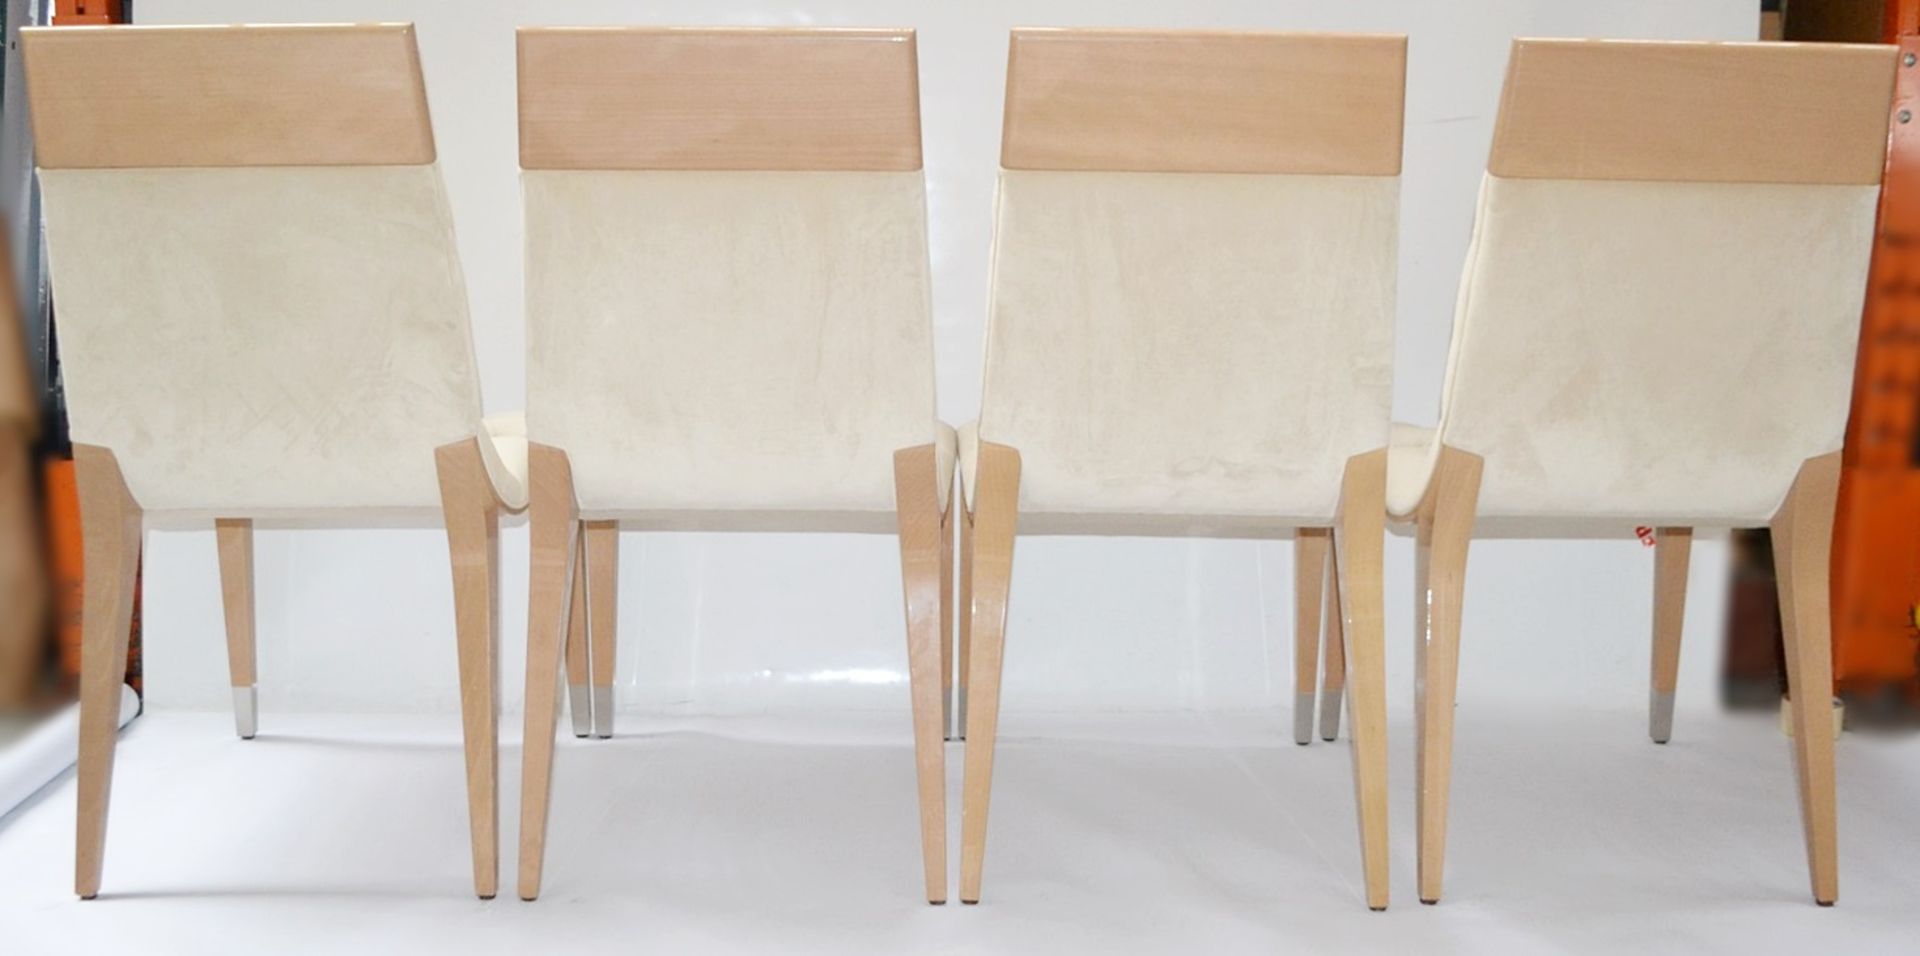 4 x GIORGIO COLLECTION 'Sunrise' Italian Designer Dining Chairs - Pre-owned In Good Condition - Image 10 of 14